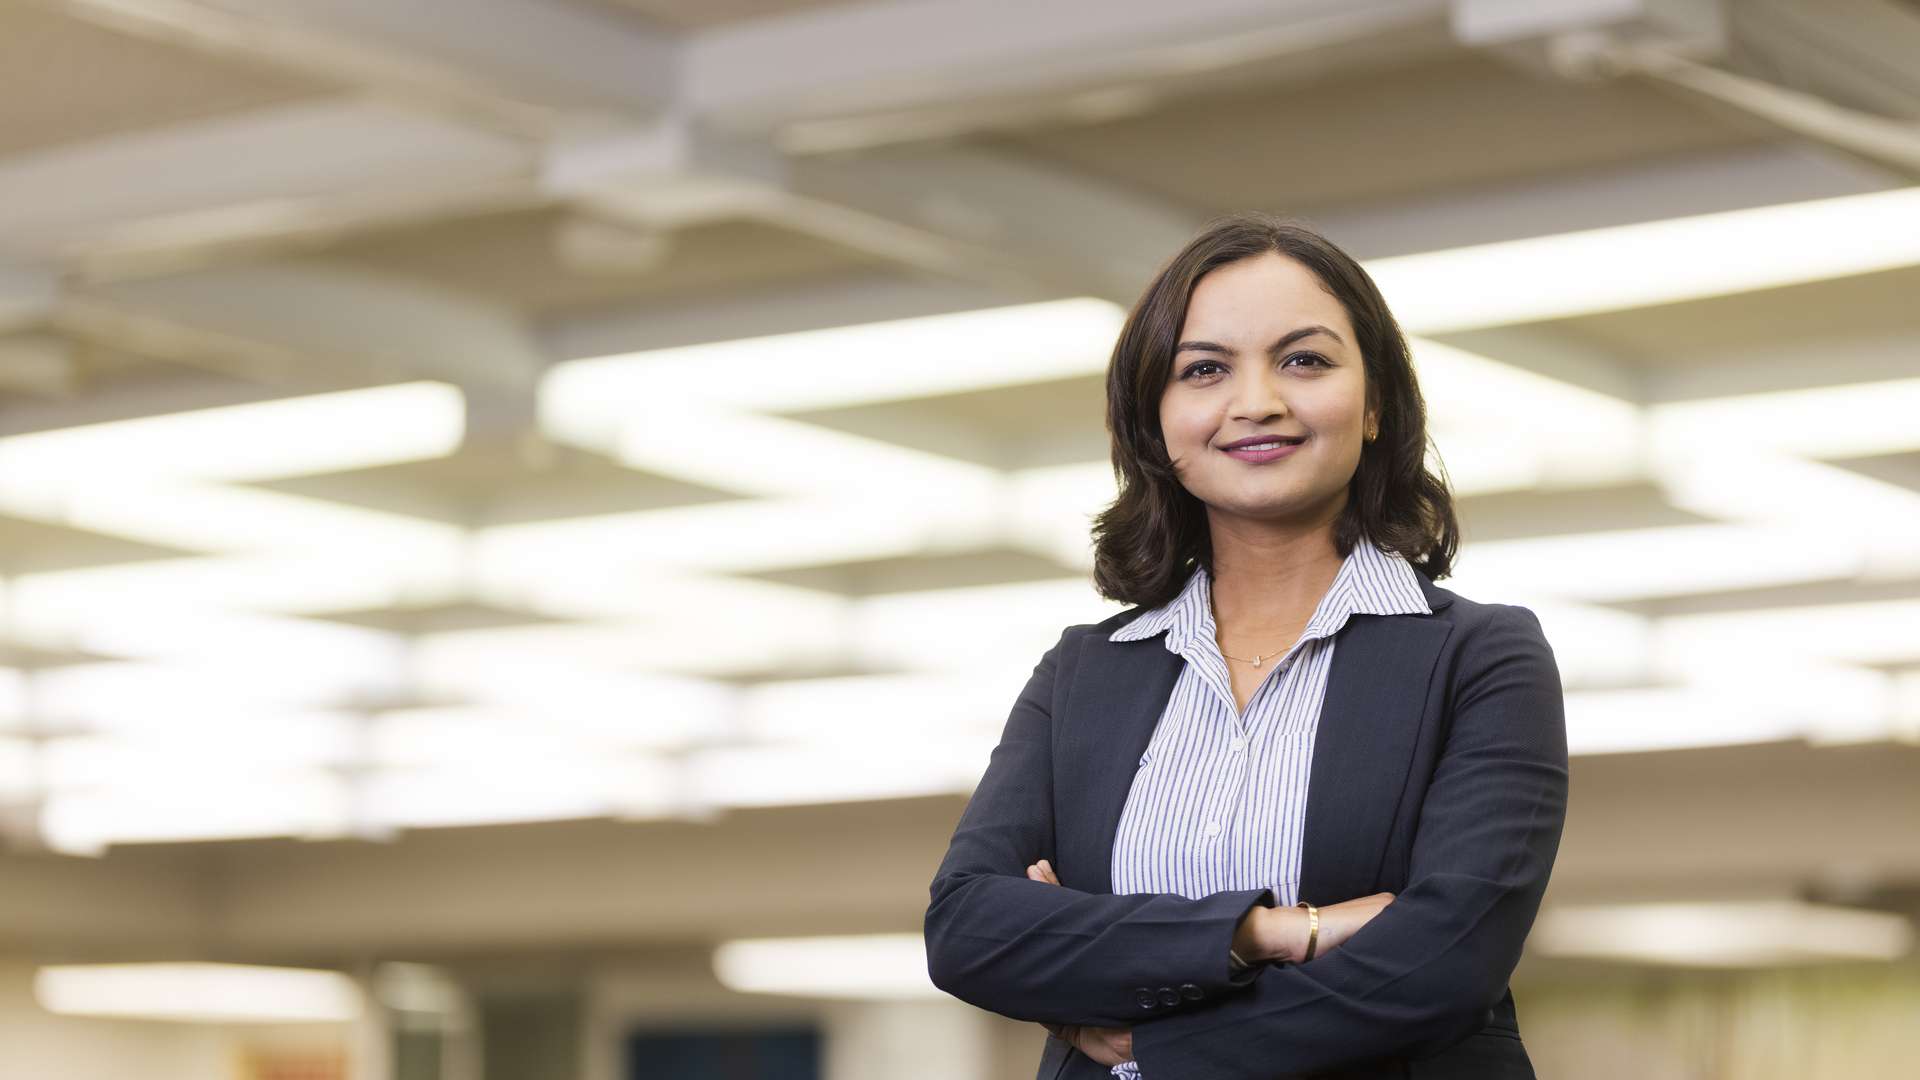 Richa Neupane, a business student standing smiling at the camera with their arms crossed.